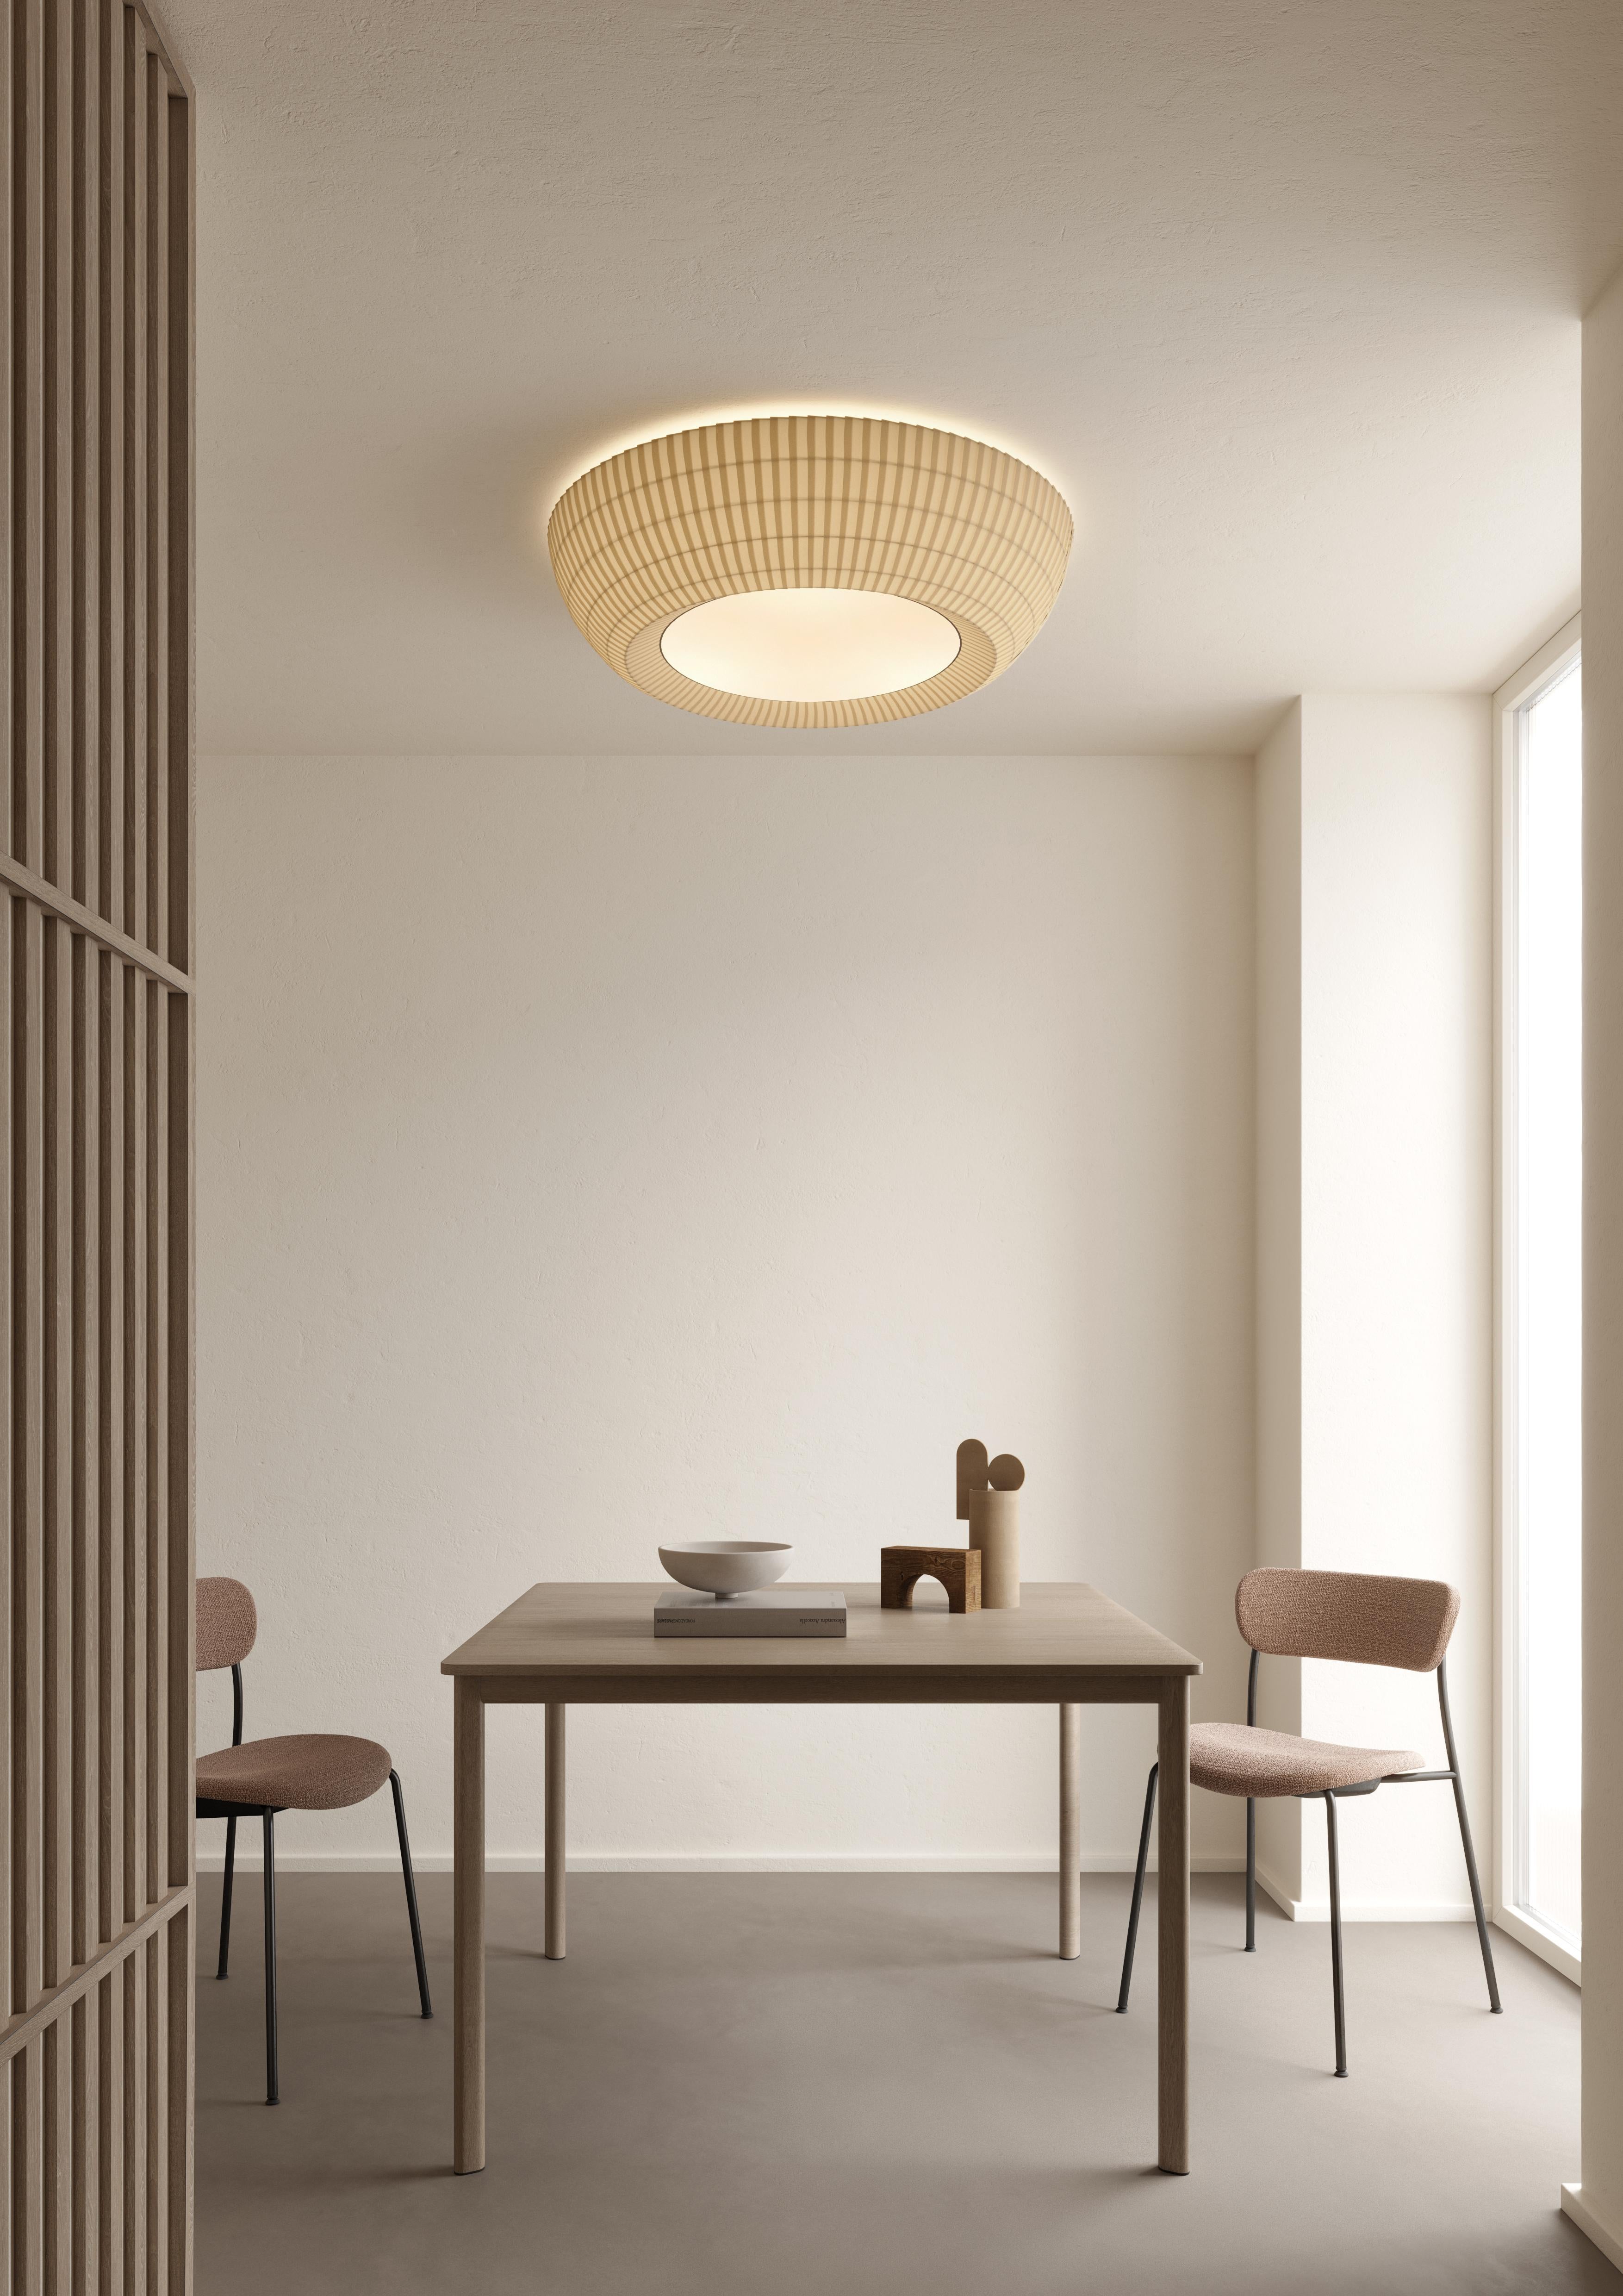 Axolight Bell Extra Large Flush Mount/ Ceiling Lamp in White by Manuel & Vanessa Vivian

The ceiling version of Bell is in continuity with the aesthetic of the pendant one. The lightness given by the fabric, the multidimensionality and the chromatic